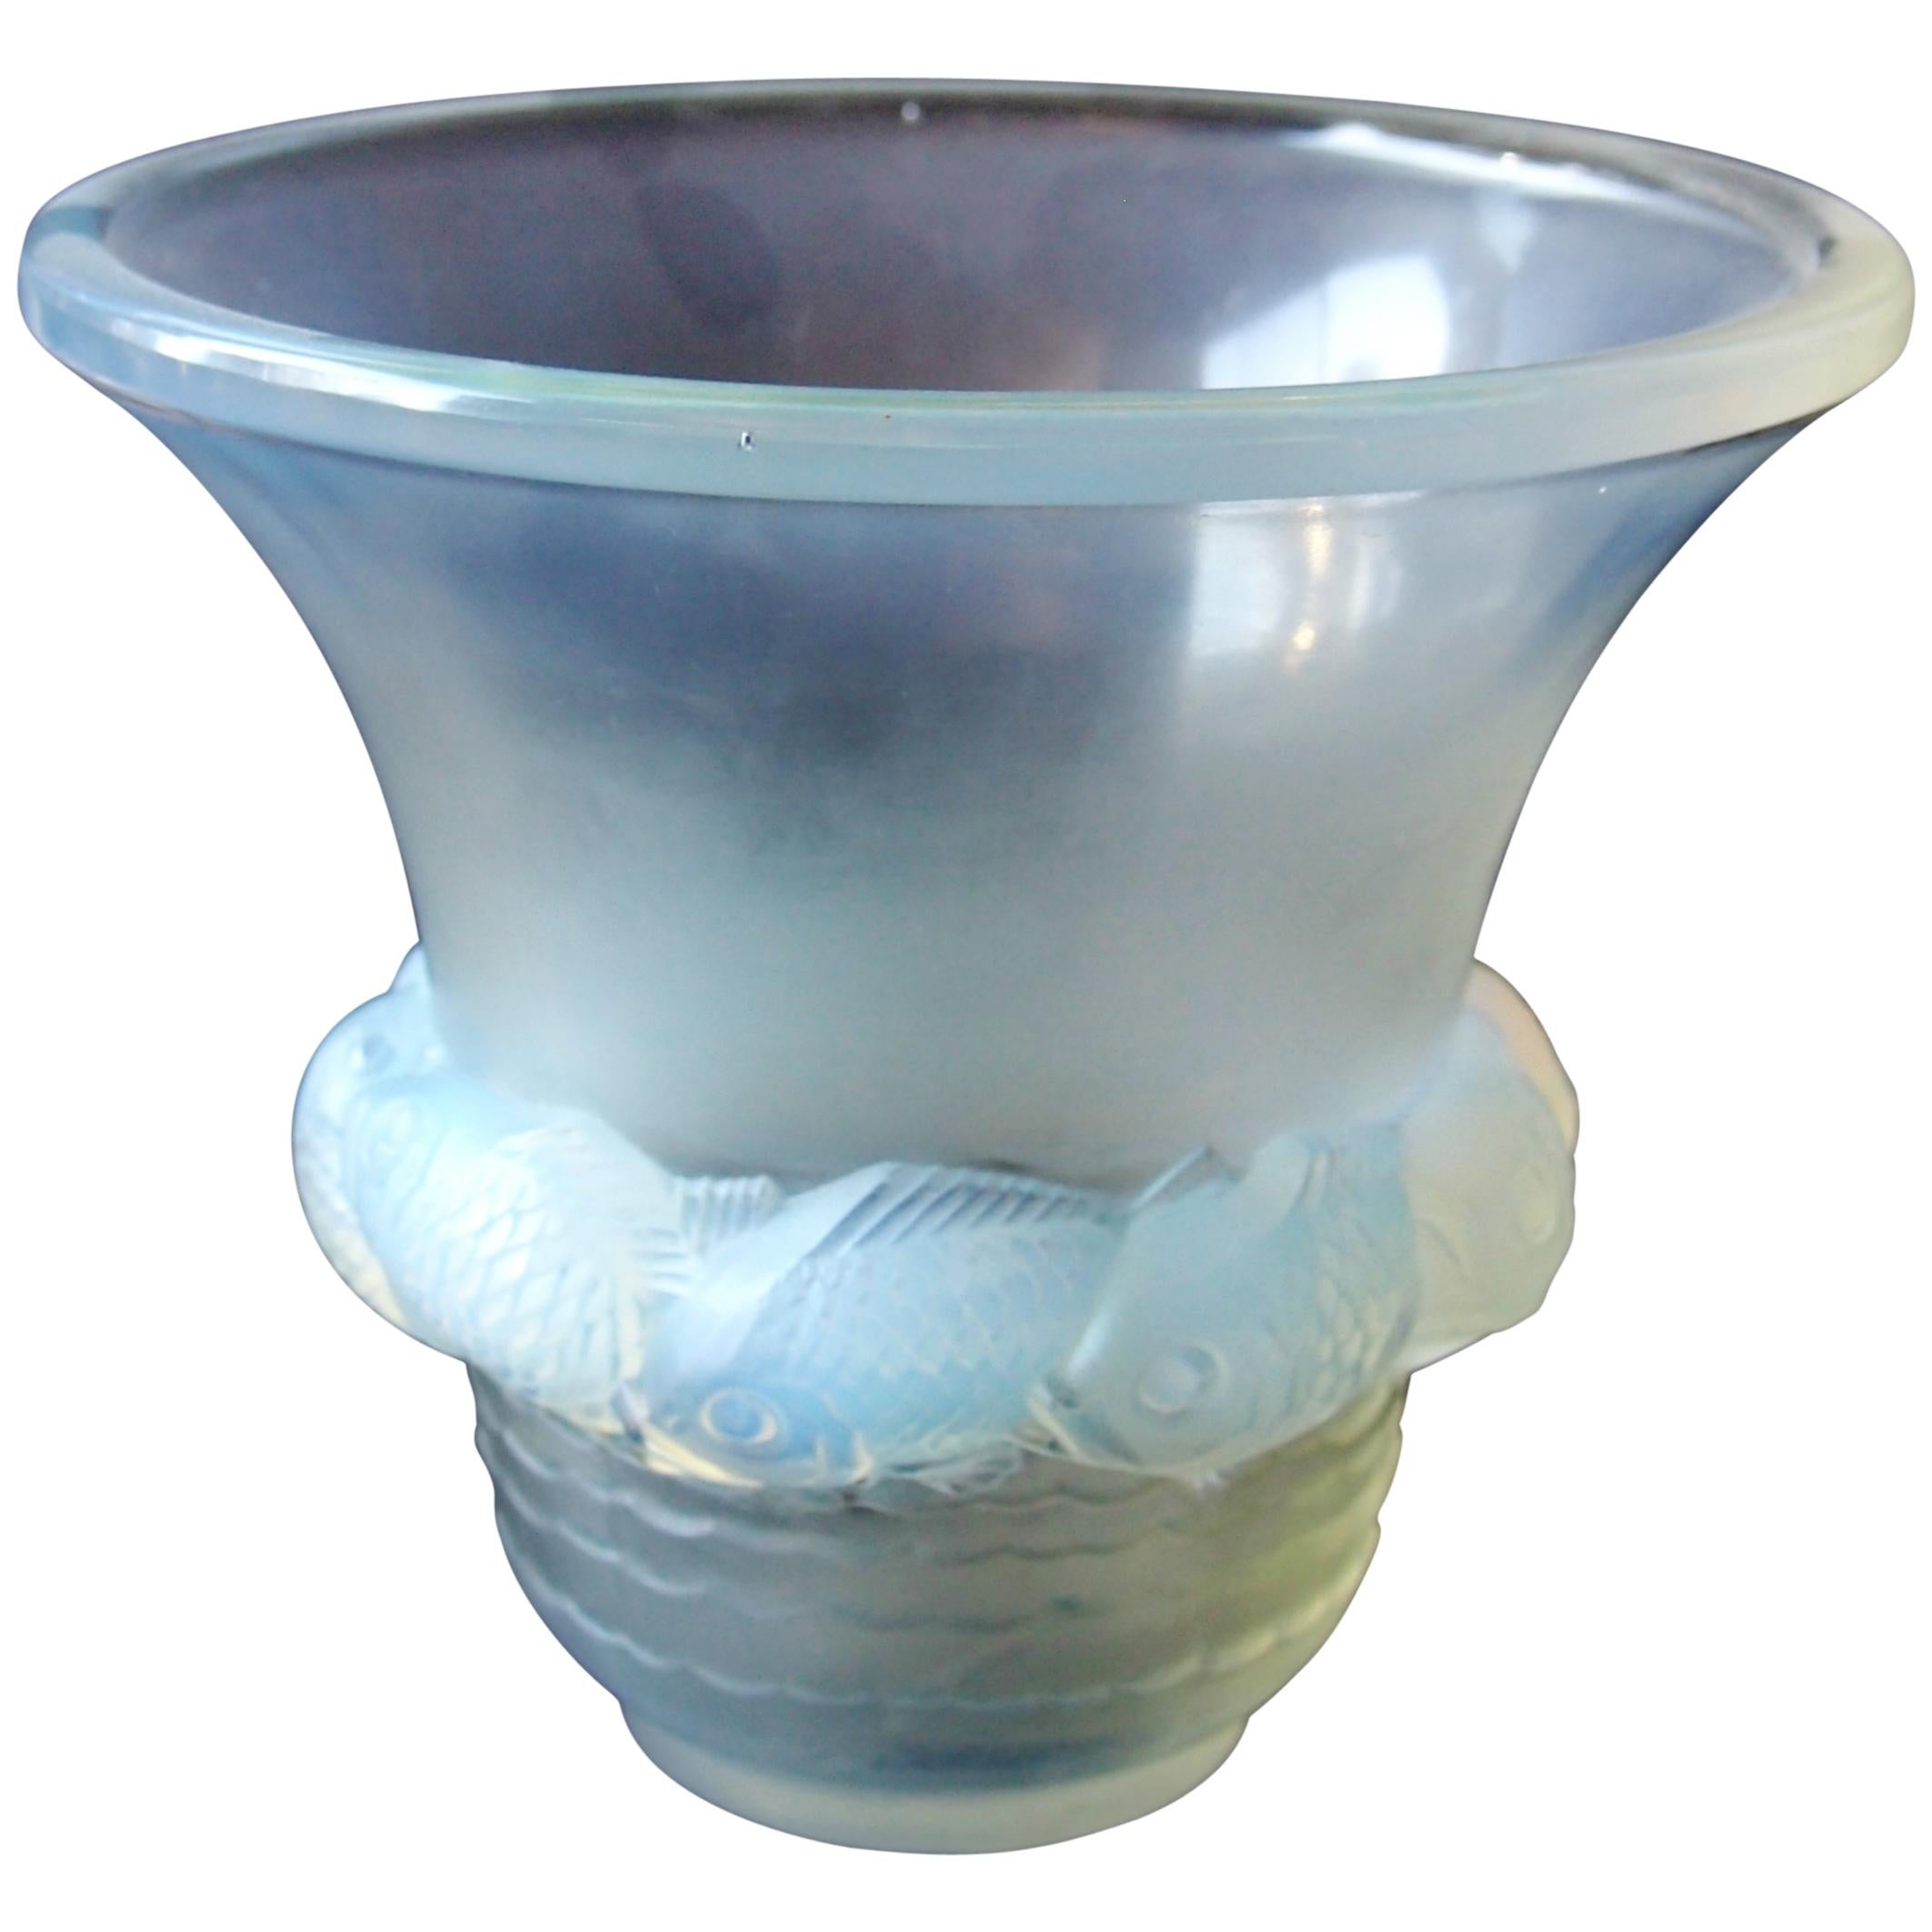 Art Deco Rene Lalique Strongly Opalescent 'Piriac' Glass Vase -French